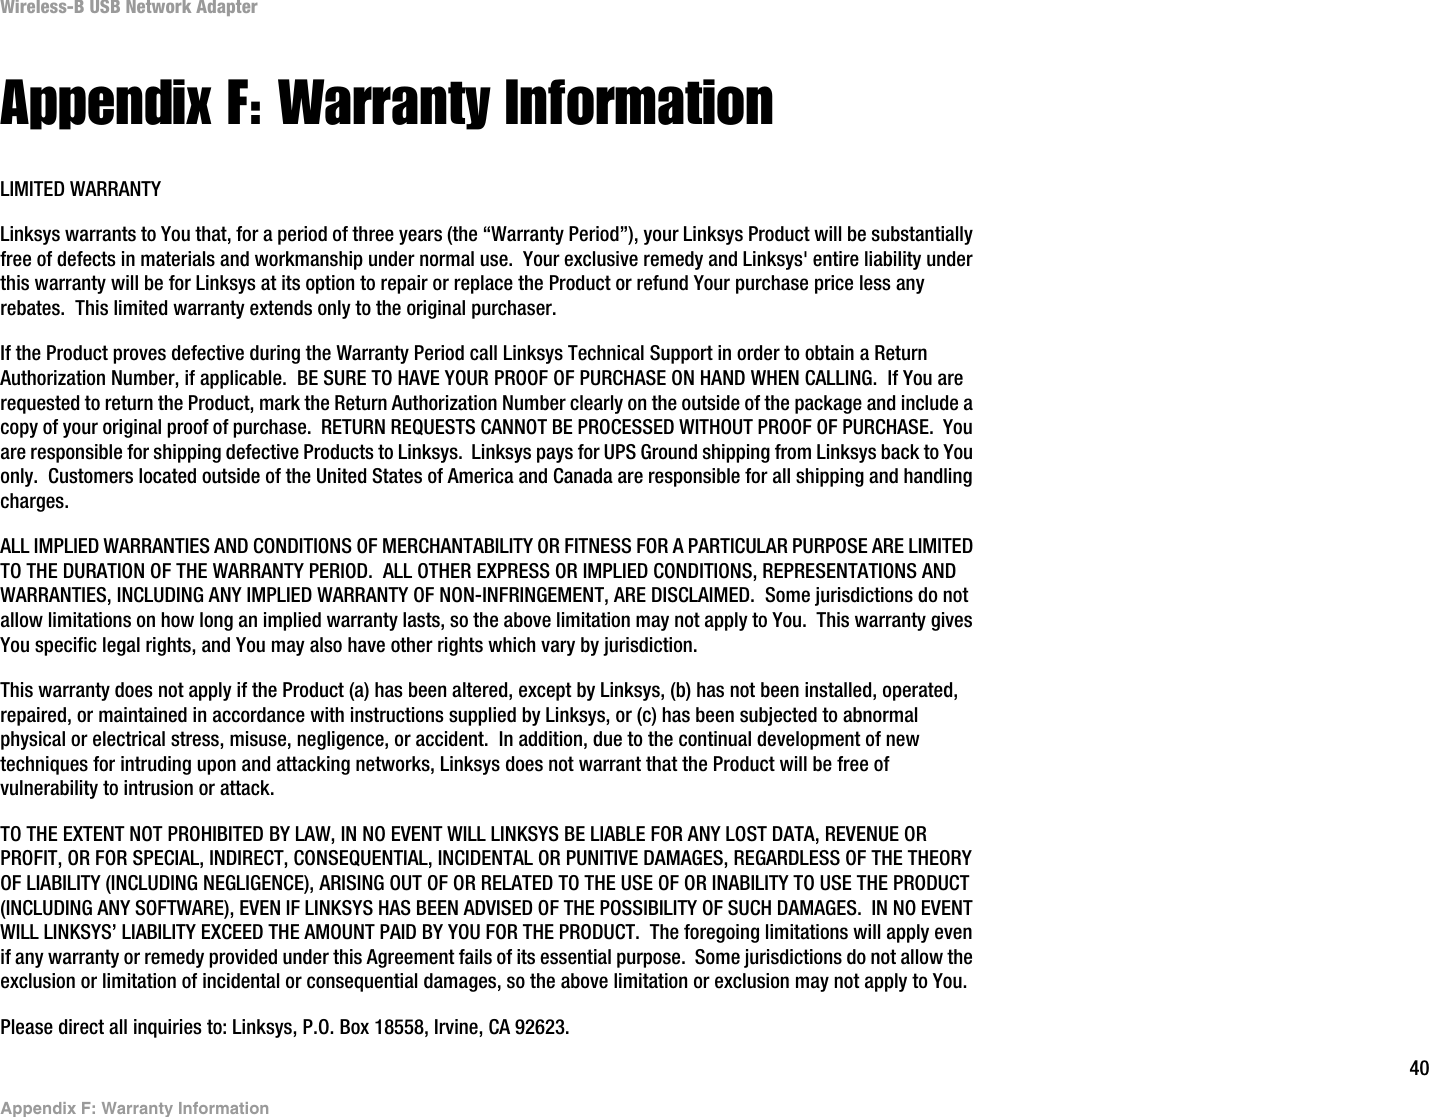 40Appendix F: Warranty InformationWireless-B USB Network AdapterAppendix F: Warranty InformationLIMITED WARRANTYLinksys warrants to You that, for a period of three years (the “Warranty Period”), your Linksys Product will be substantially free of defects in materials and workmanship under normal use.  Your exclusive remedy and Linksys&apos; entire liability under this warranty will be for Linksys at its option to repair or replace the Product or refund Your purchase price less any rebates.  This limited warranty extends only to the original purchaser.  If the Product proves defective during the Warranty Period call Linksys Technical Support in order to obtain a Return Authorization Number, if applicable.  BE SURE TO HAVE YOUR PROOF OF PURCHASE ON HAND WHEN CALLING.  If You are requested to return the Product, mark the Return Authorization Number clearly on the outside of the package and include a copy of your original proof of purchase.  RETURN REQUESTS CANNOT BE PROCESSED WITHOUT PROOF OF PURCHASE.  You are responsible for shipping defective Products to Linksys.  Linksys pays for UPS Ground shipping from Linksys back to You only.  Customers located outside of the United States of America and Canada are responsible for all shipping and handling charges. ALL IMPLIED WARRANTIES AND CONDITIONS OF MERCHANTABILITY OR FITNESS FOR A PARTICULAR PURPOSE ARE LIMITED TO THE DURATION OF THE WARRANTY PERIOD.  ALL OTHER EXPRESS OR IMPLIED CONDITIONS, REPRESENTATIONS AND WARRANTIES, INCLUDING ANY IMPLIED WARRANTY OF NON-INFRINGEMENT, ARE DISCLAIMED.  Some jurisdictions do not allow limitations on how long an implied warranty lasts, so the above limitation may not apply to You.  This warranty gives You specific legal rights, and You may also have other rights which vary by jurisdiction.This warranty does not apply if the Product (a) has been altered, except by Linksys, (b) has not been installed, operated, repaired, or maintained in accordance with instructions supplied by Linksys, or (c) has been subjected to abnormal physical or electrical stress, misuse, negligence, or accident.  In addition, due to the continual development of new techniques for intruding upon and attacking networks, Linksys does not warrant that the Product will be free of vulnerability to intrusion or attack.TO THE EXTENT NOT PROHIBITED BY LAW, IN NO EVENT WILL LINKSYS BE LIABLE FOR ANY LOST DATA, REVENUE OR PROFIT, OR FOR SPECIAL, INDIRECT, CONSEQUENTIAL, INCIDENTAL OR PUNITIVE DAMAGES, REGARDLESS OF THE THEORY OF LIABILITY (INCLUDING NEGLIGENCE), ARISING OUT OF OR RELATED TO THE USE OF OR INABILITY TO USE THE PRODUCT (INCLUDING ANY SOFTWARE), EVEN IF LINKSYS HAS BEEN ADVISED OF THE POSSIBILITY OF SUCH DAMAGES.  IN NO EVENT WILL LINKSYS’ LIABILITY EXCEED THE AMOUNT PAID BY YOU FOR THE PRODUCT.  The foregoing limitations will apply even if any warranty or remedy provided under this Agreement fails of its essential purpose.  Some jurisdictions do not allow the exclusion or limitation of incidental or consequential damages, so the above limitation or exclusion may not apply to You.Please direct all inquiries to: Linksys, P.O. Box 18558, Irvine, CA 92623.